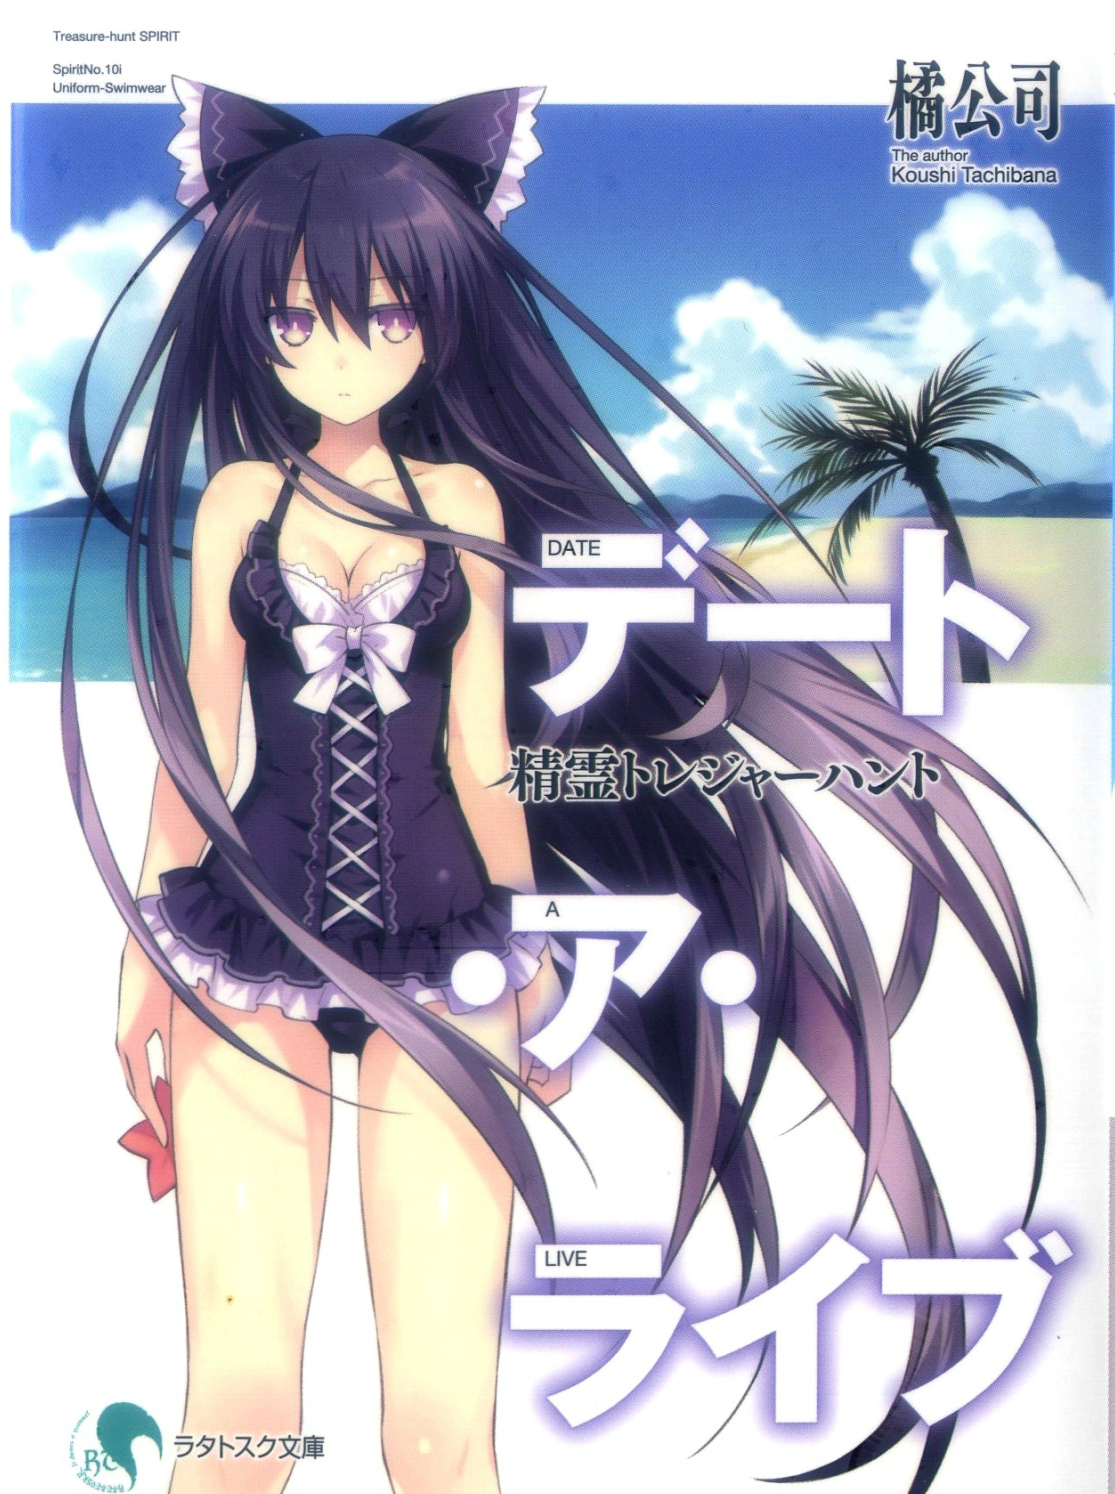 date of live